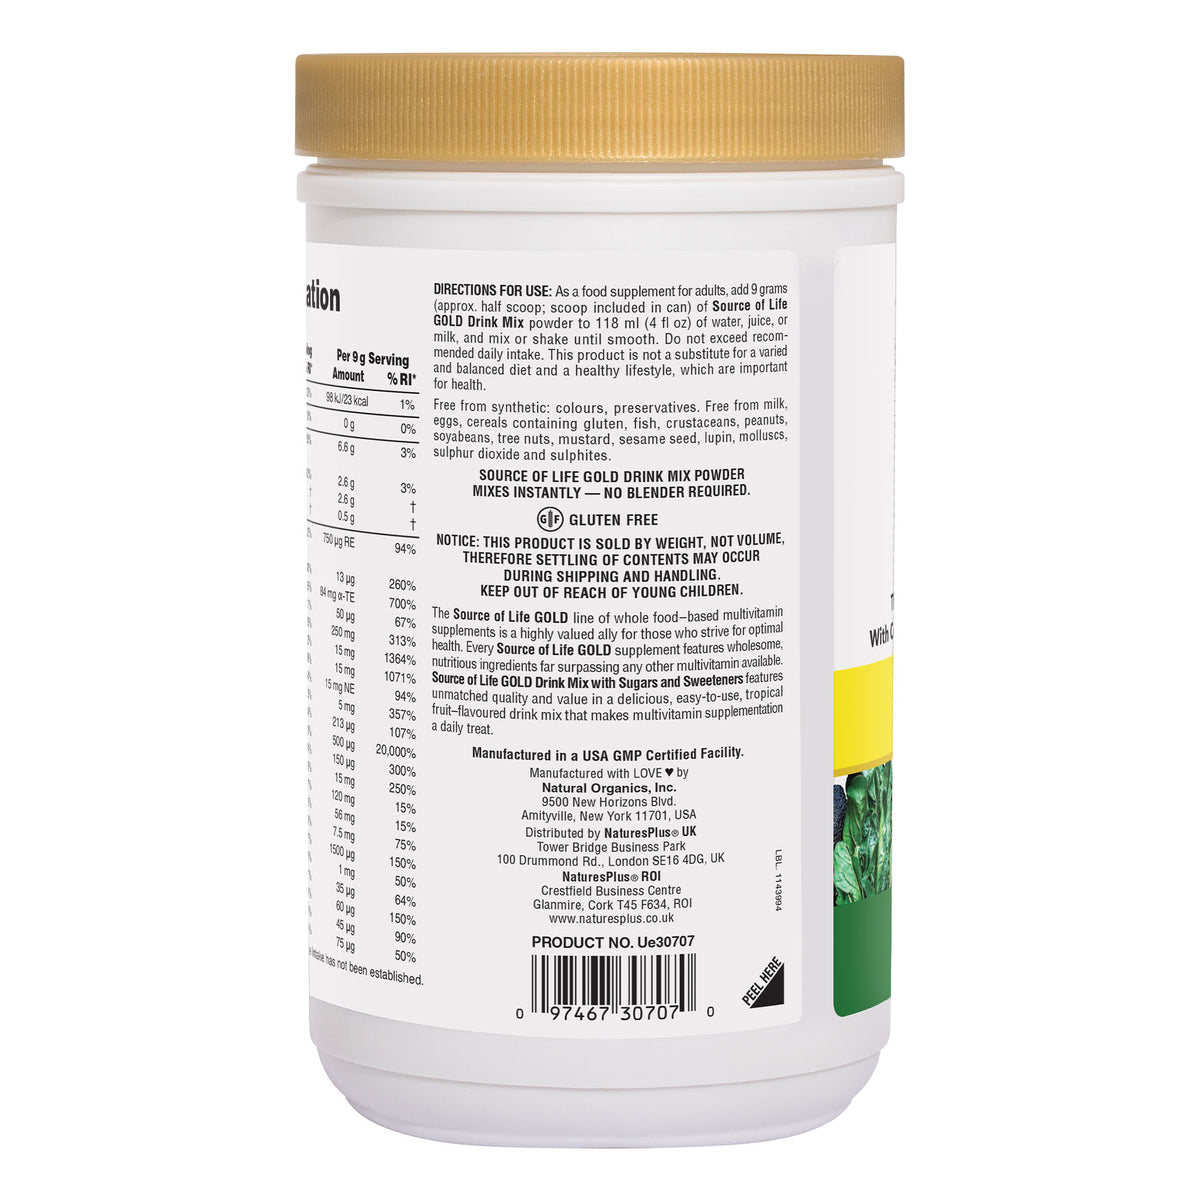 product image of Source of Life® GOLD Drink Mix containing Source of Life® GOLD Drink Mix